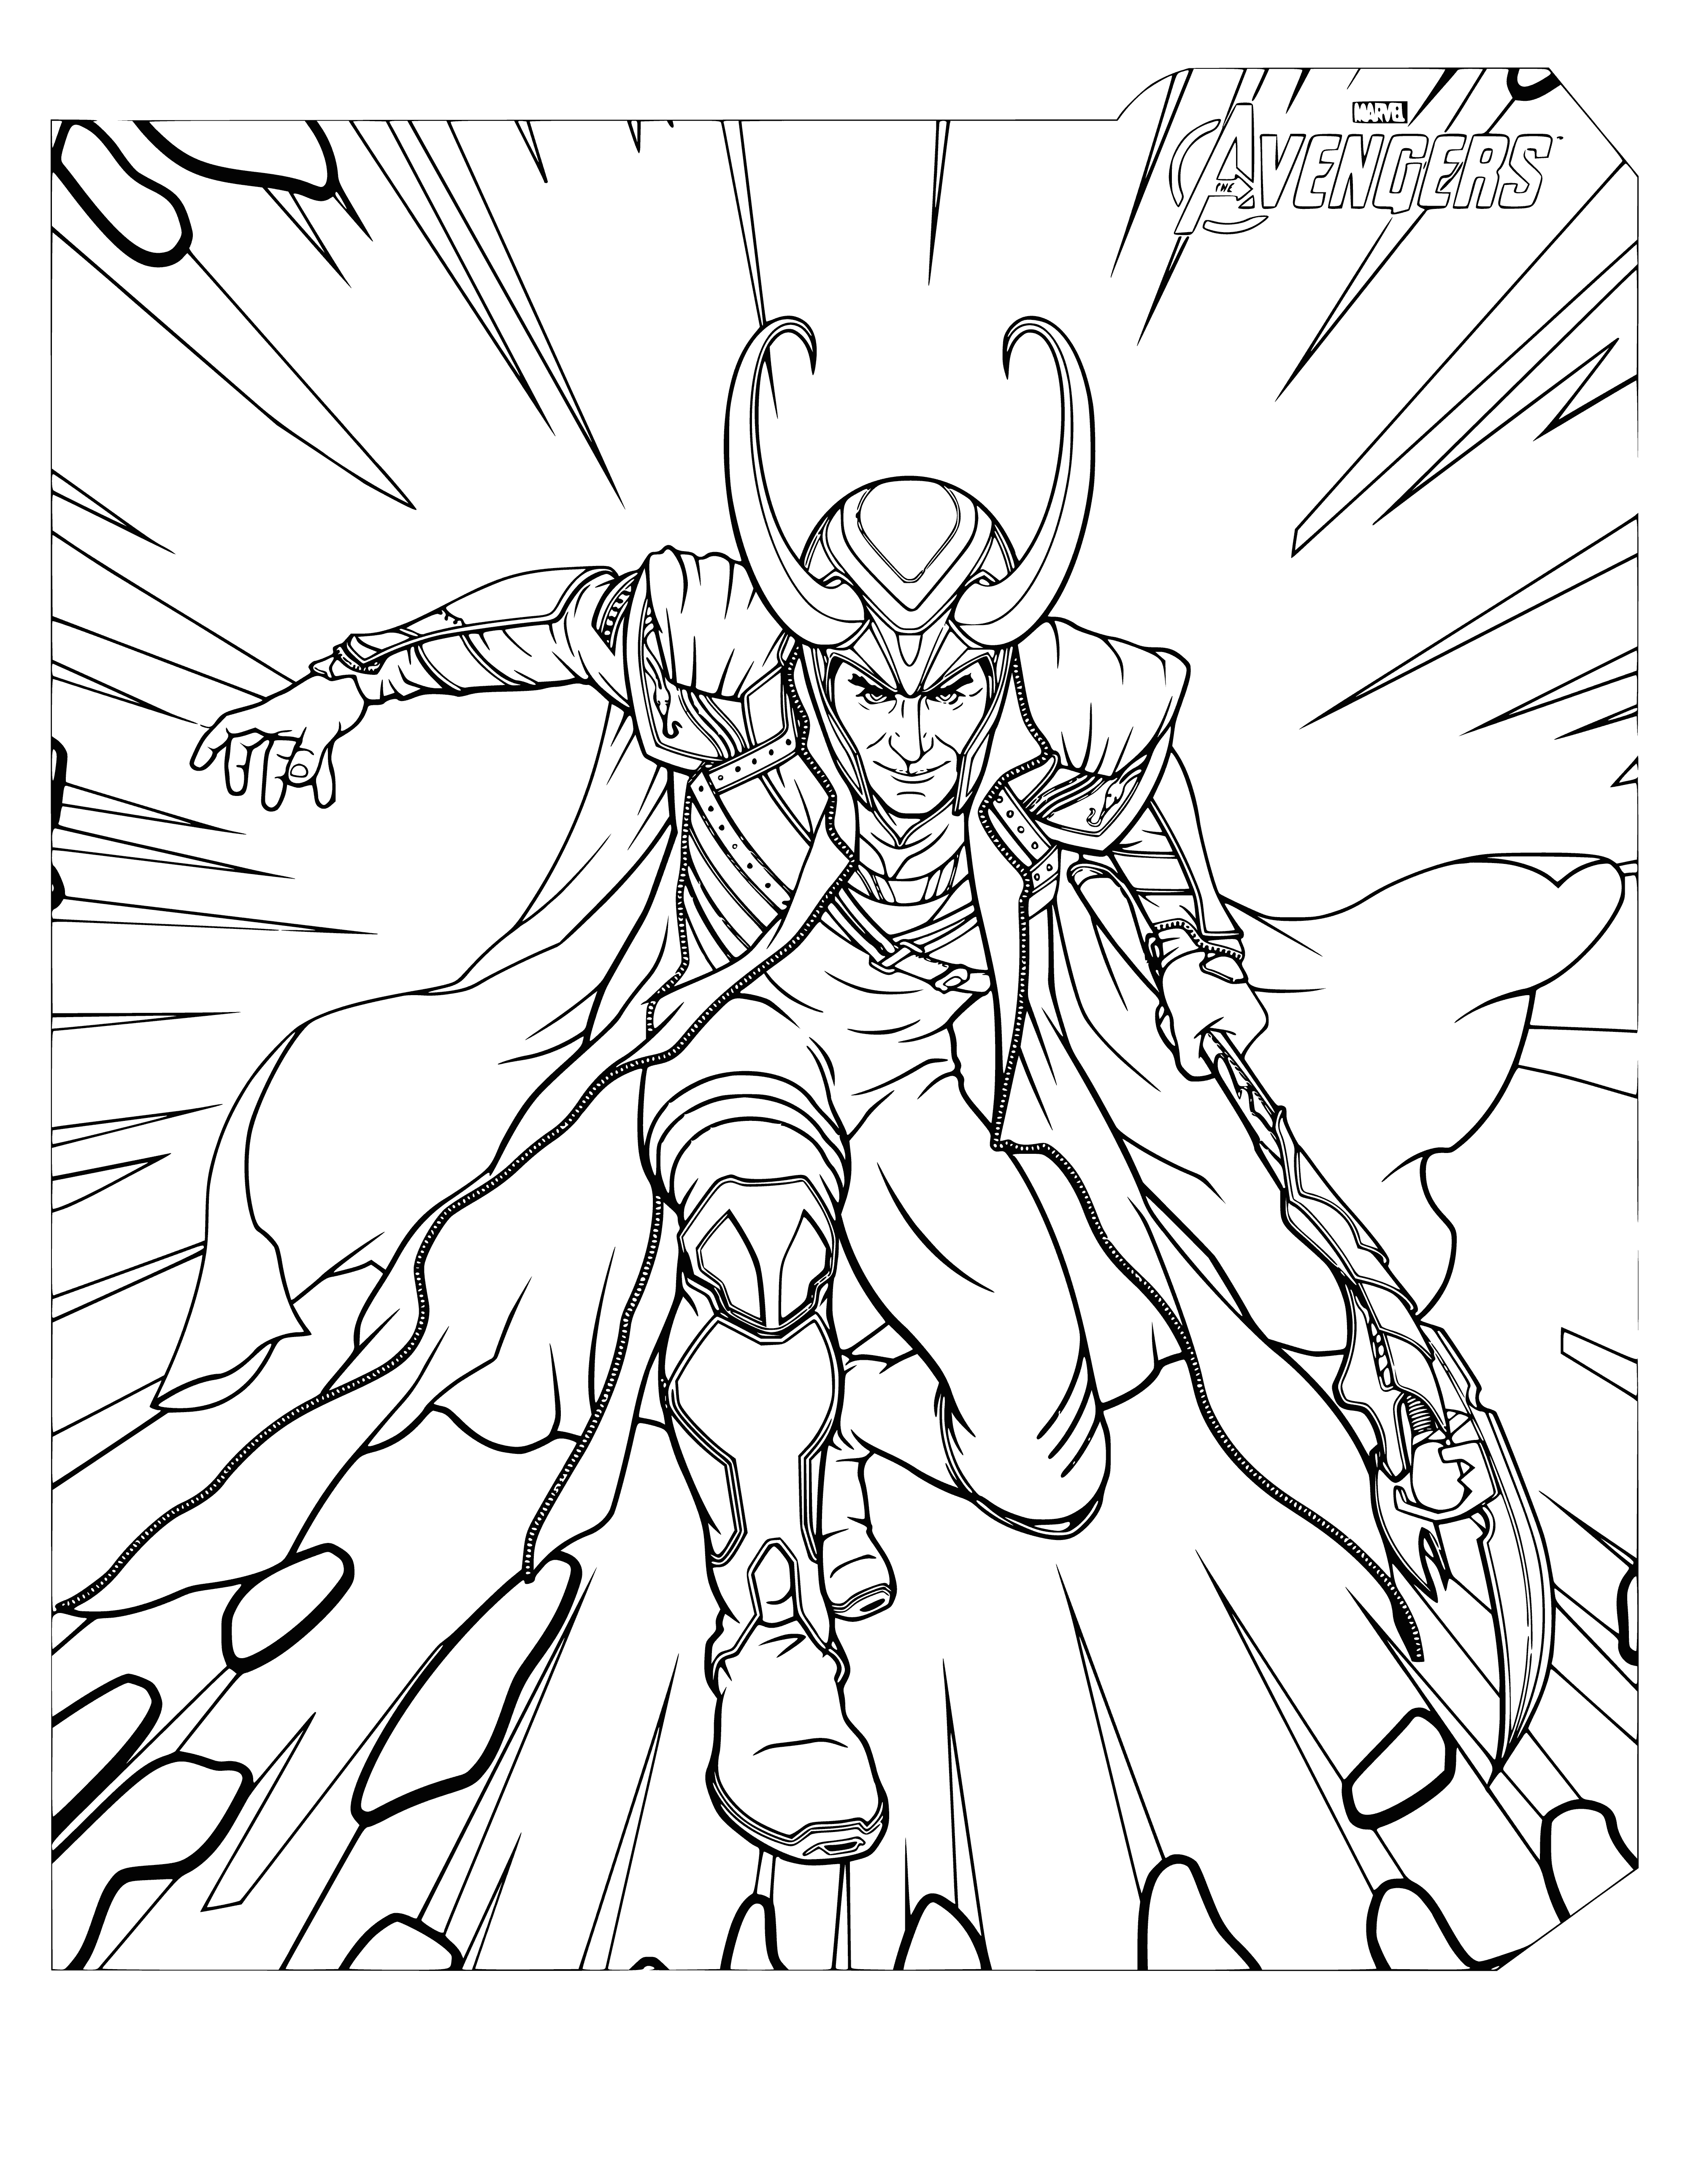 coloring page: Loki runs or possibly flies, cape billowing and arm raised, eyes glittering with malicious intent - a menacing presence on this coloring page.